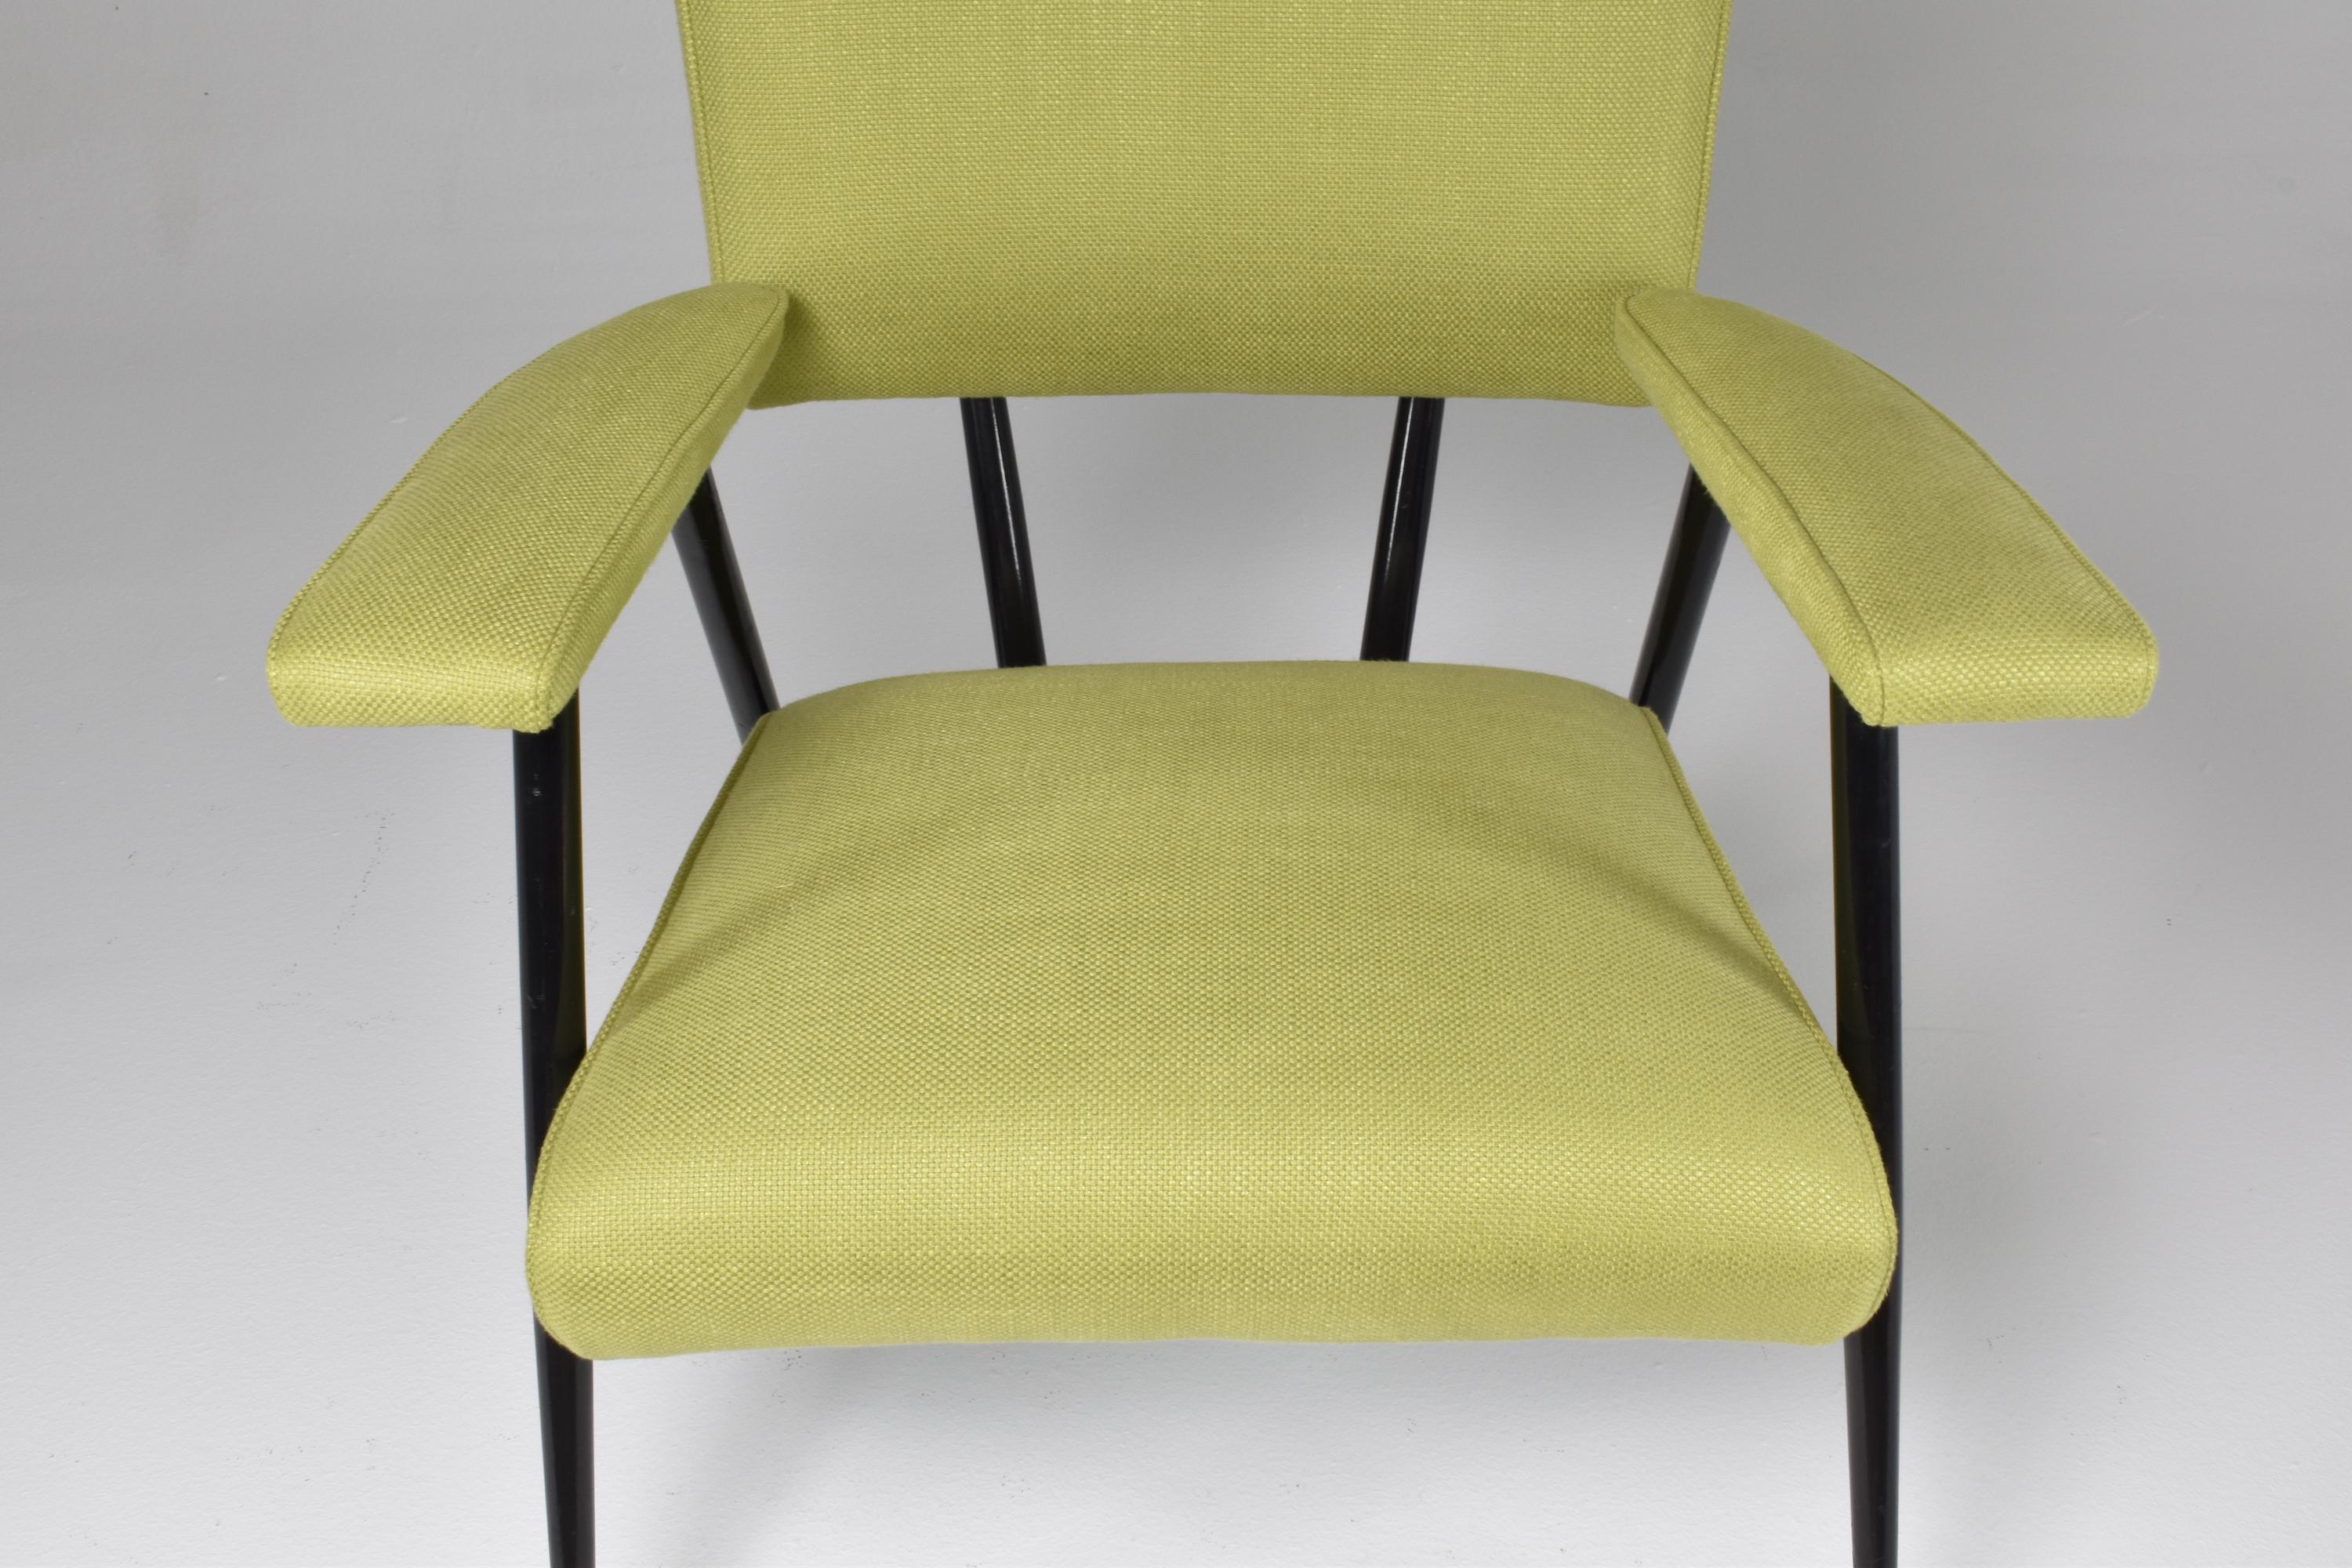 1950's, French Mid-century modern Steel Armchair For Sale 5